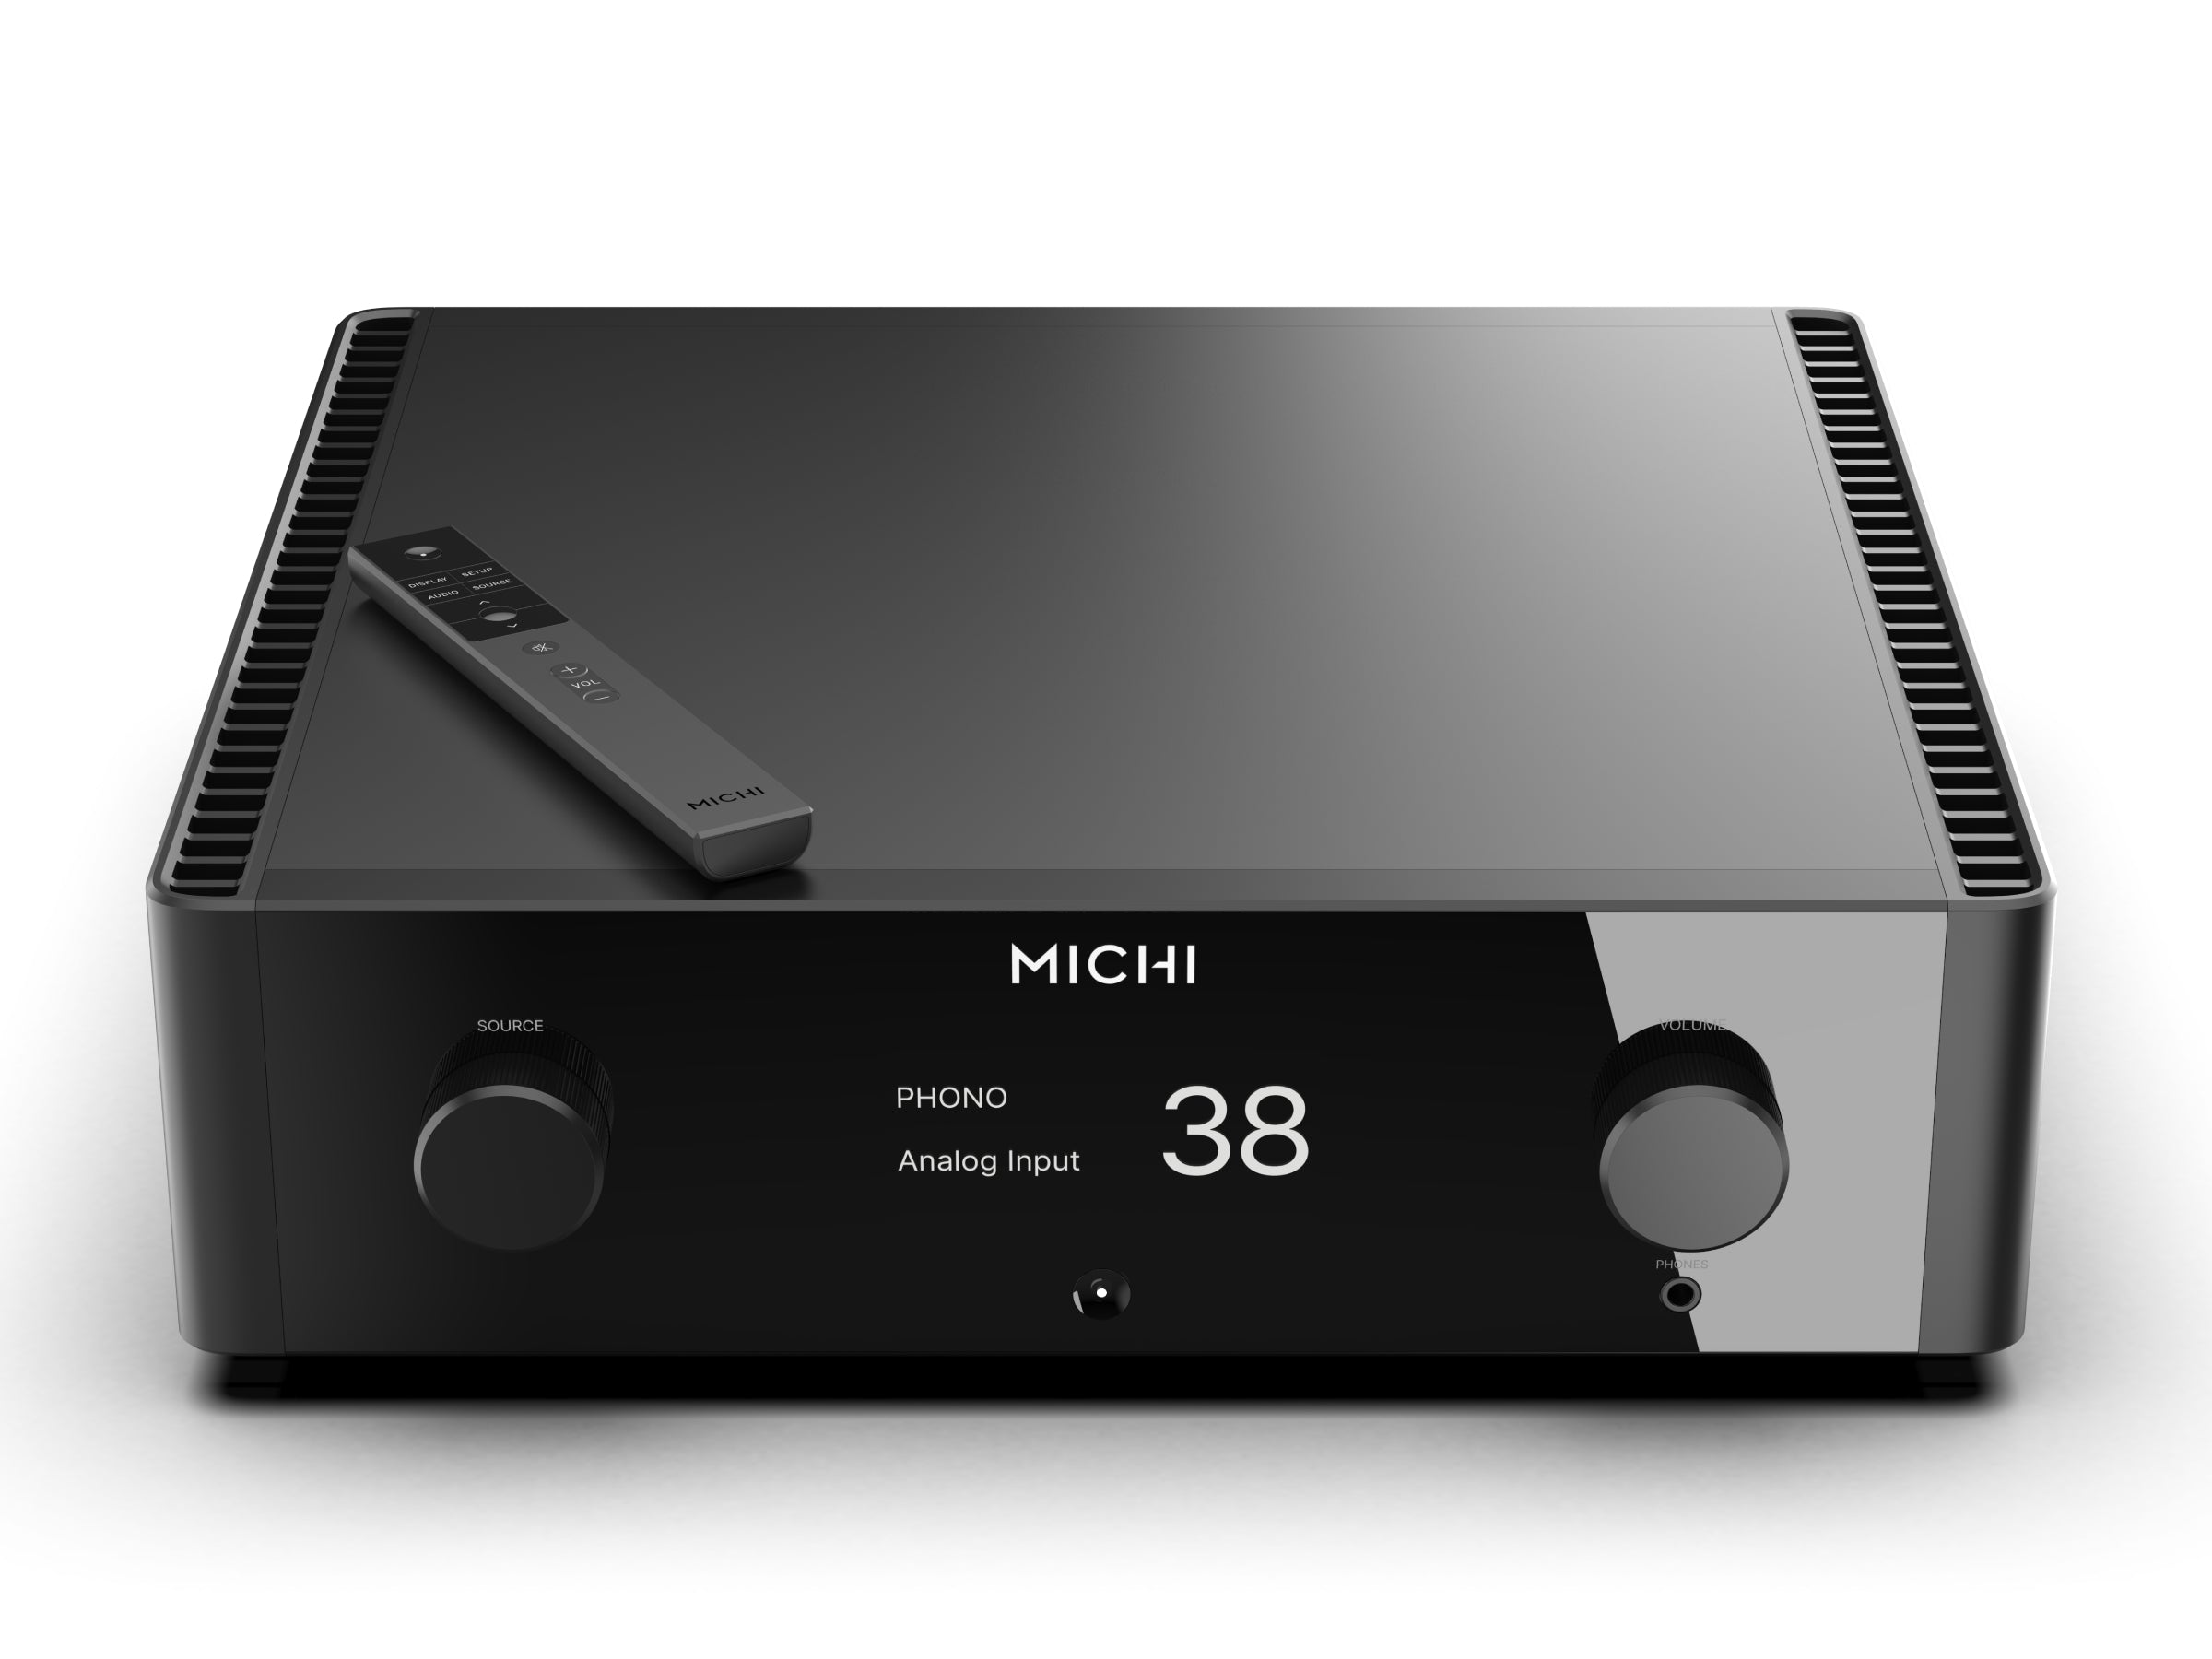 Rotel MICHI X3 Series 2 Integrated Amplifier